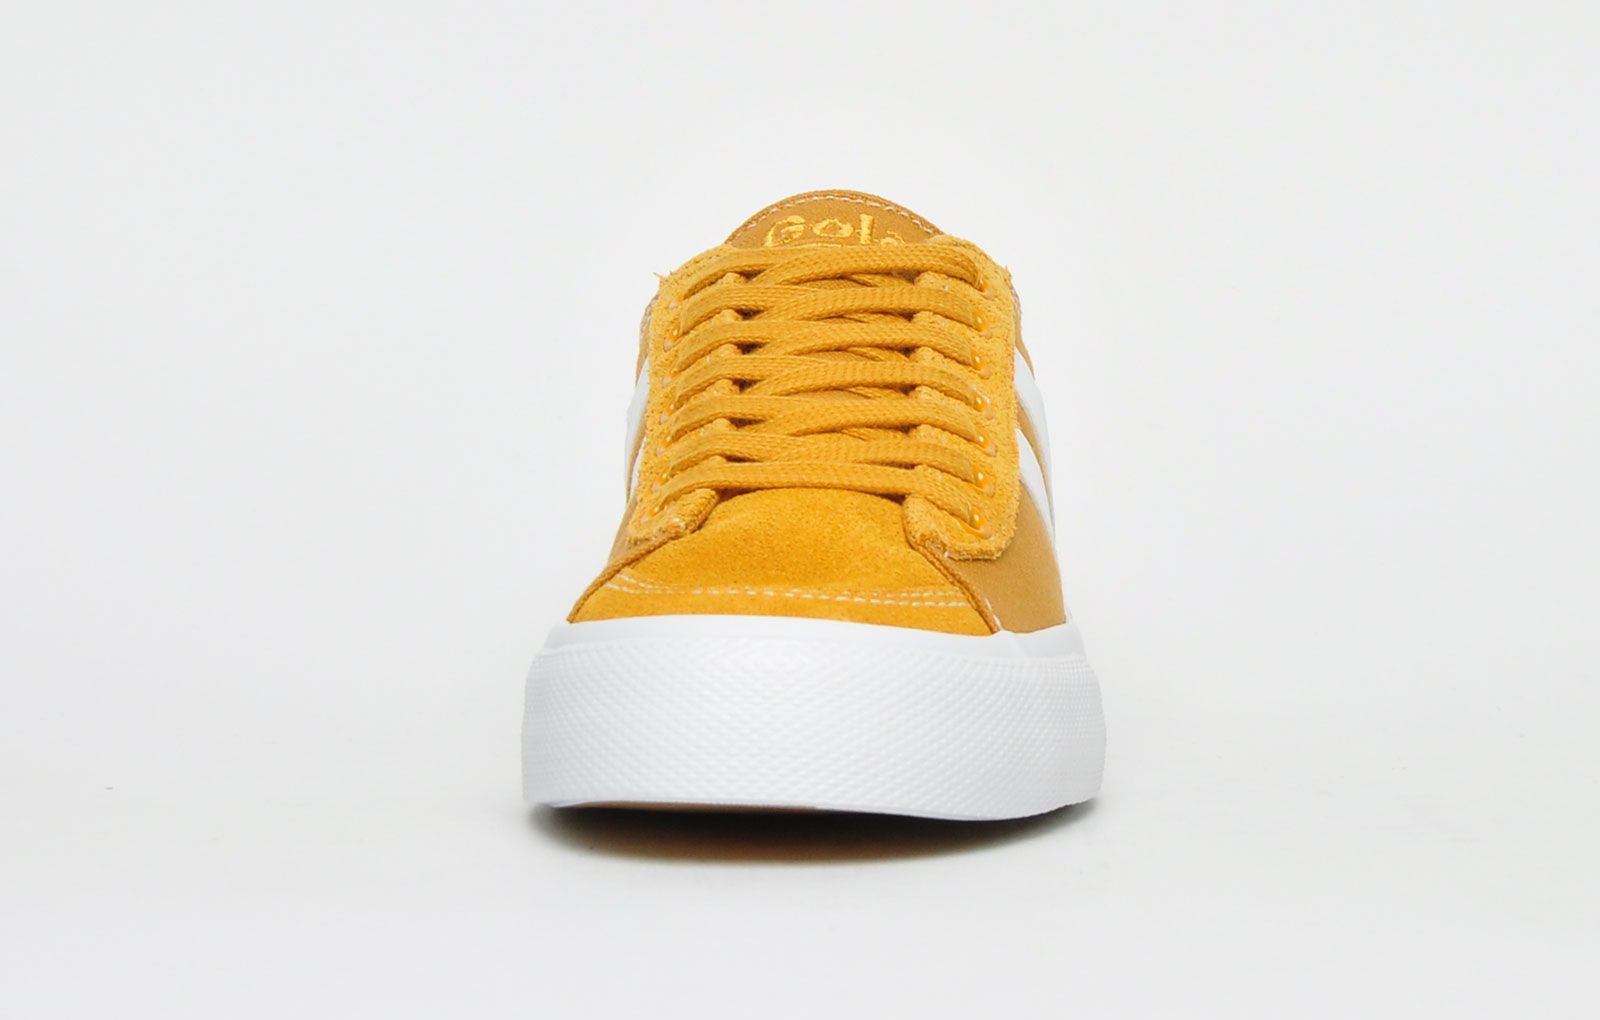 <p>These Gola Classics Quota II women’s girls trainers feature a timeless plimsol silhouette, delivering a touch of vintage charm to your casual footwear collection. A padded insole for that extra comfort along with a secure lace-up system for security delivers great everyday wear. Complete with a partial suede leather upper to add depth and even more character</p> <p>The Quota II is delivered in a robust canvas textile construction for a vintage retro style with a contrasting white Gola wingflash and on-trend deep foxing providing a classic style that will never go out of fashion.</p> <p> - Gola Classics plimsol silhouette</p> <p>- Secure lace up fastening</p> <p> - Canvas textile upper enhances ventilation.</p> <p>- Suede leather toe box and trims</p> <p>- Cushioned insole delivers a comfortable fit</p> <p> - Vulcanised sole</p> <p> - Gola Classics branding throughout</p>